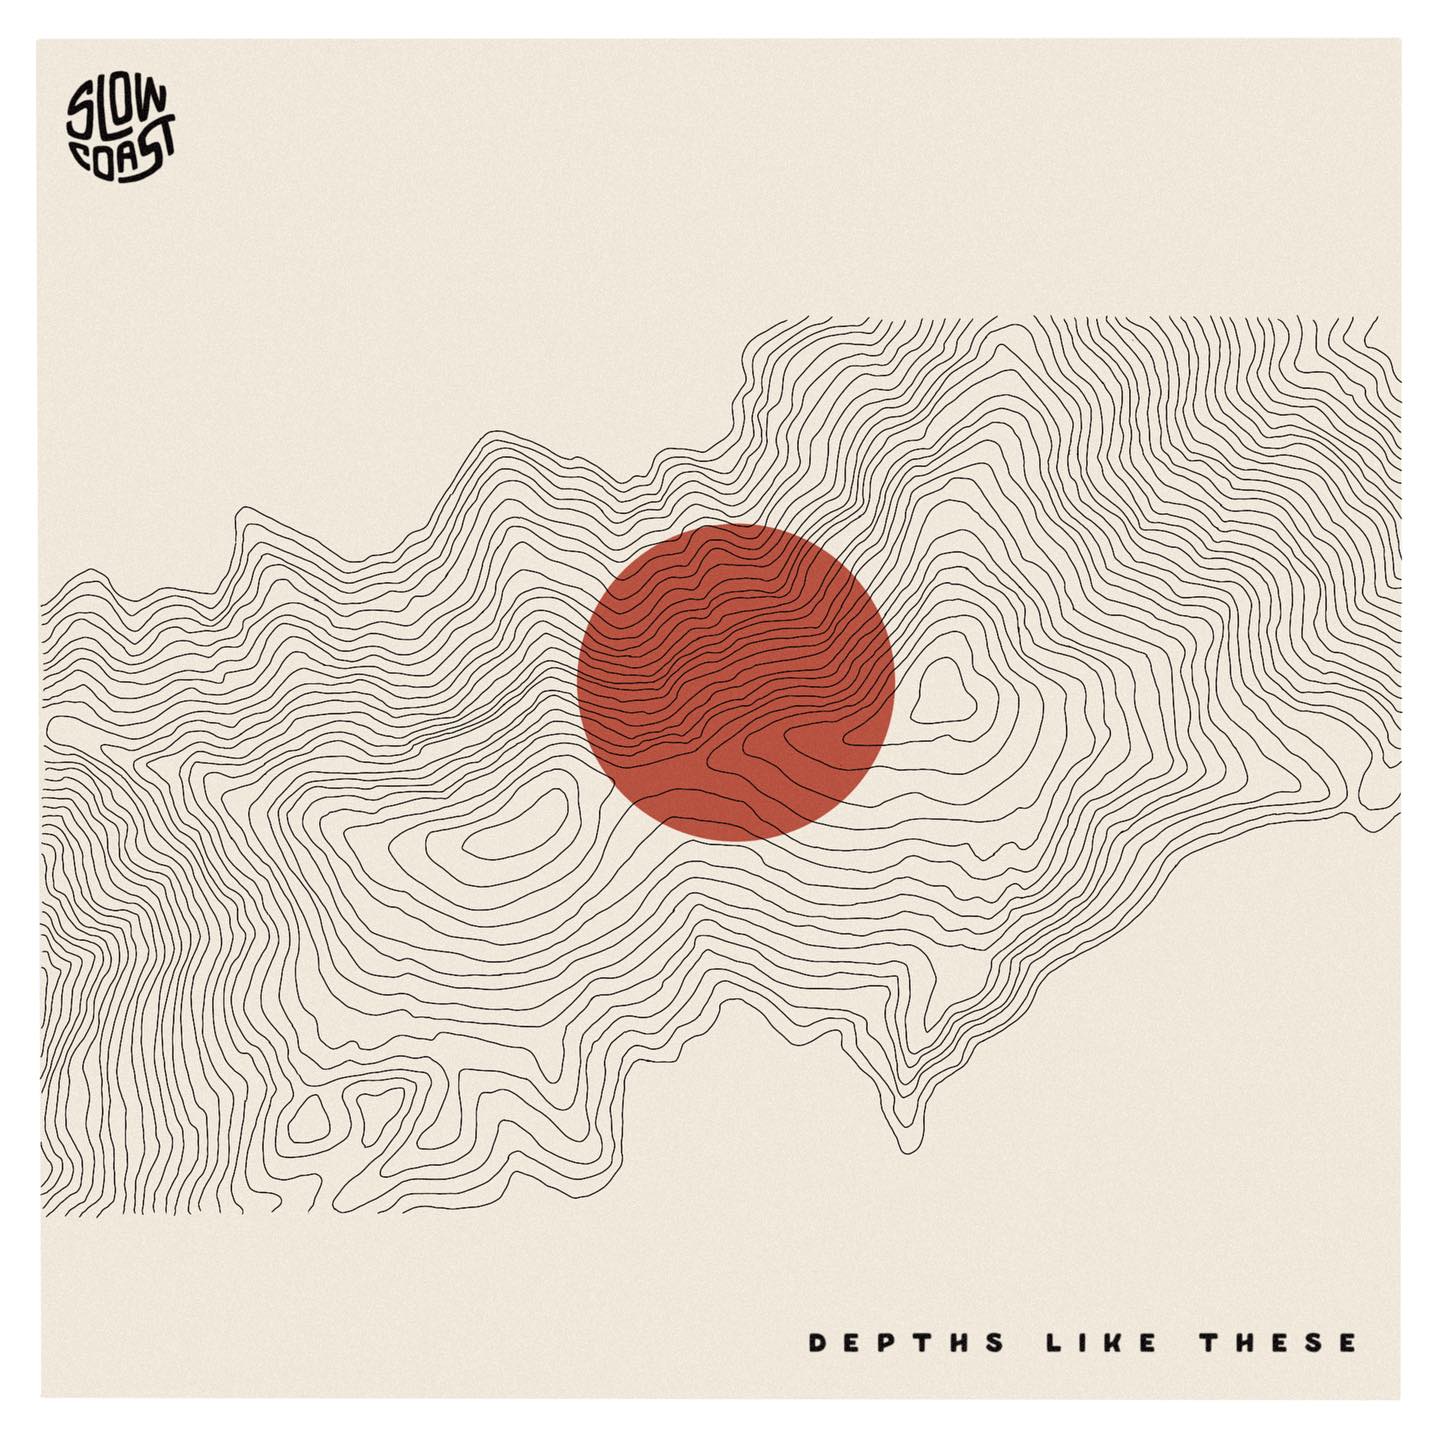 ALBUM REVIEW: Depths Like These by Slow Coast